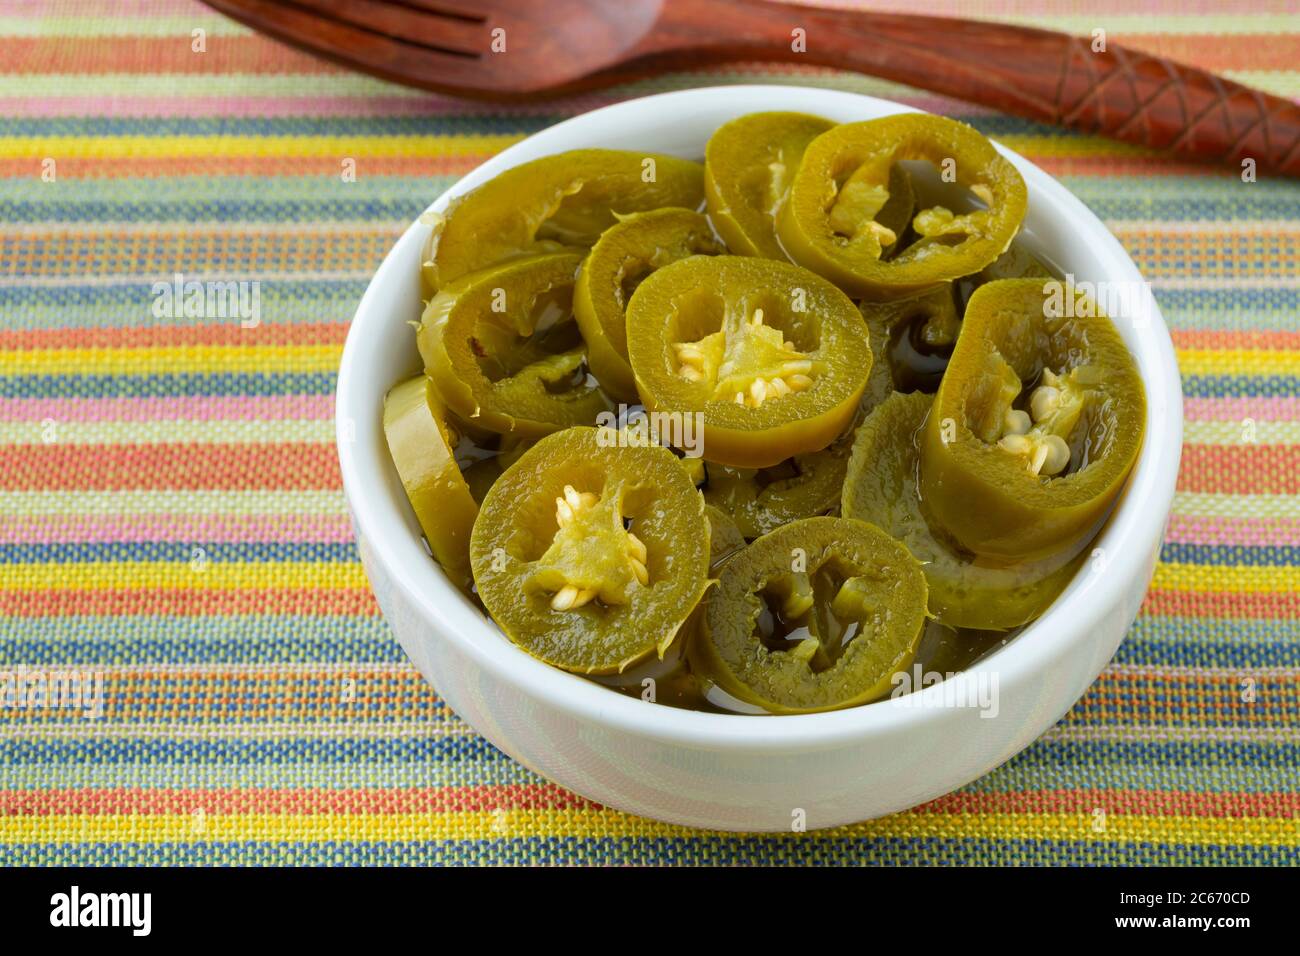 Bowl with sliced pickled jalapeno peppers Stock Photo